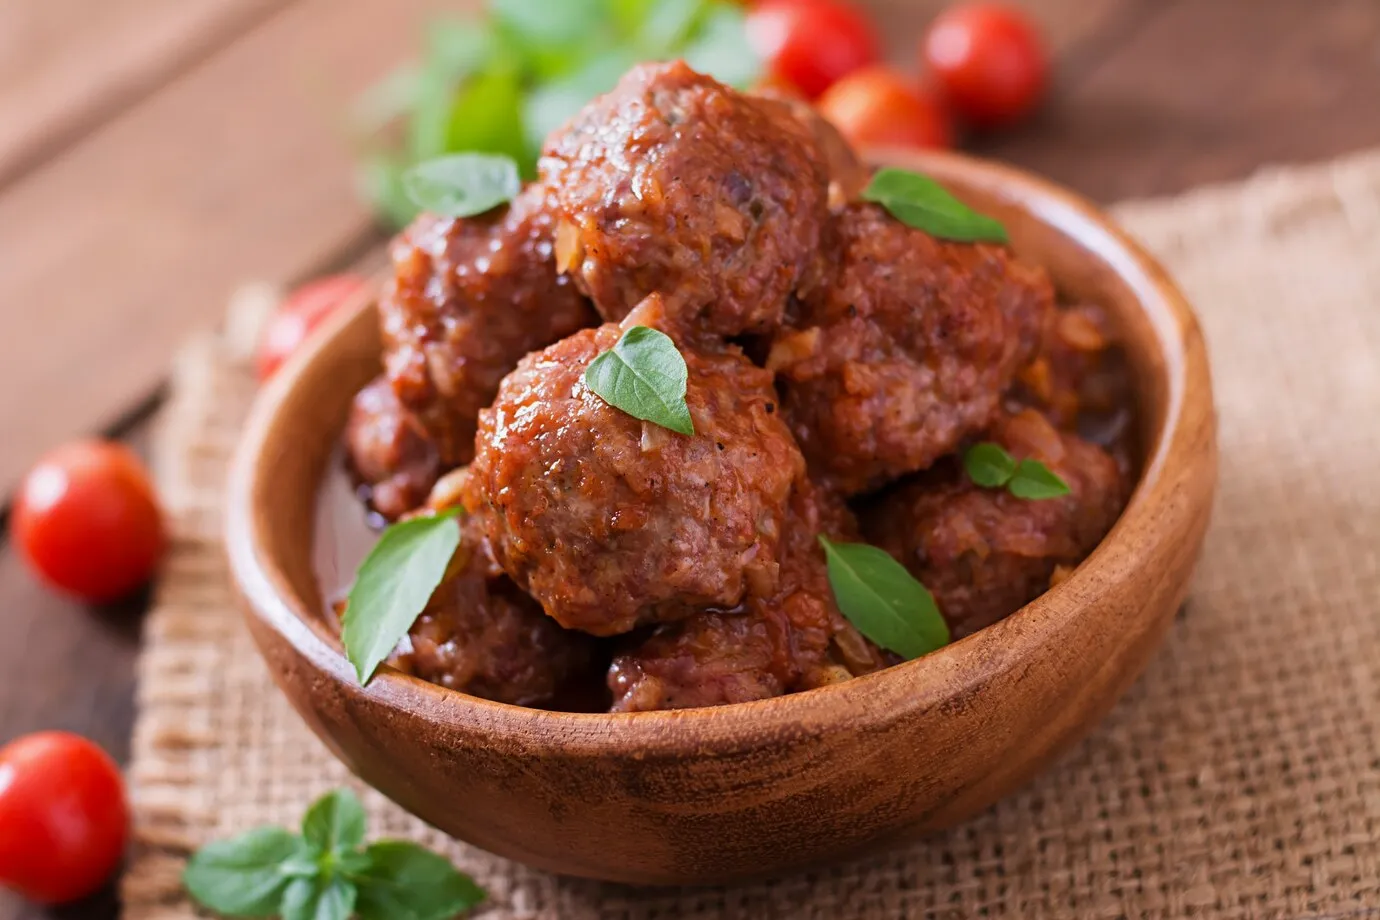 A bowl of meatballs wwith tomato sauce